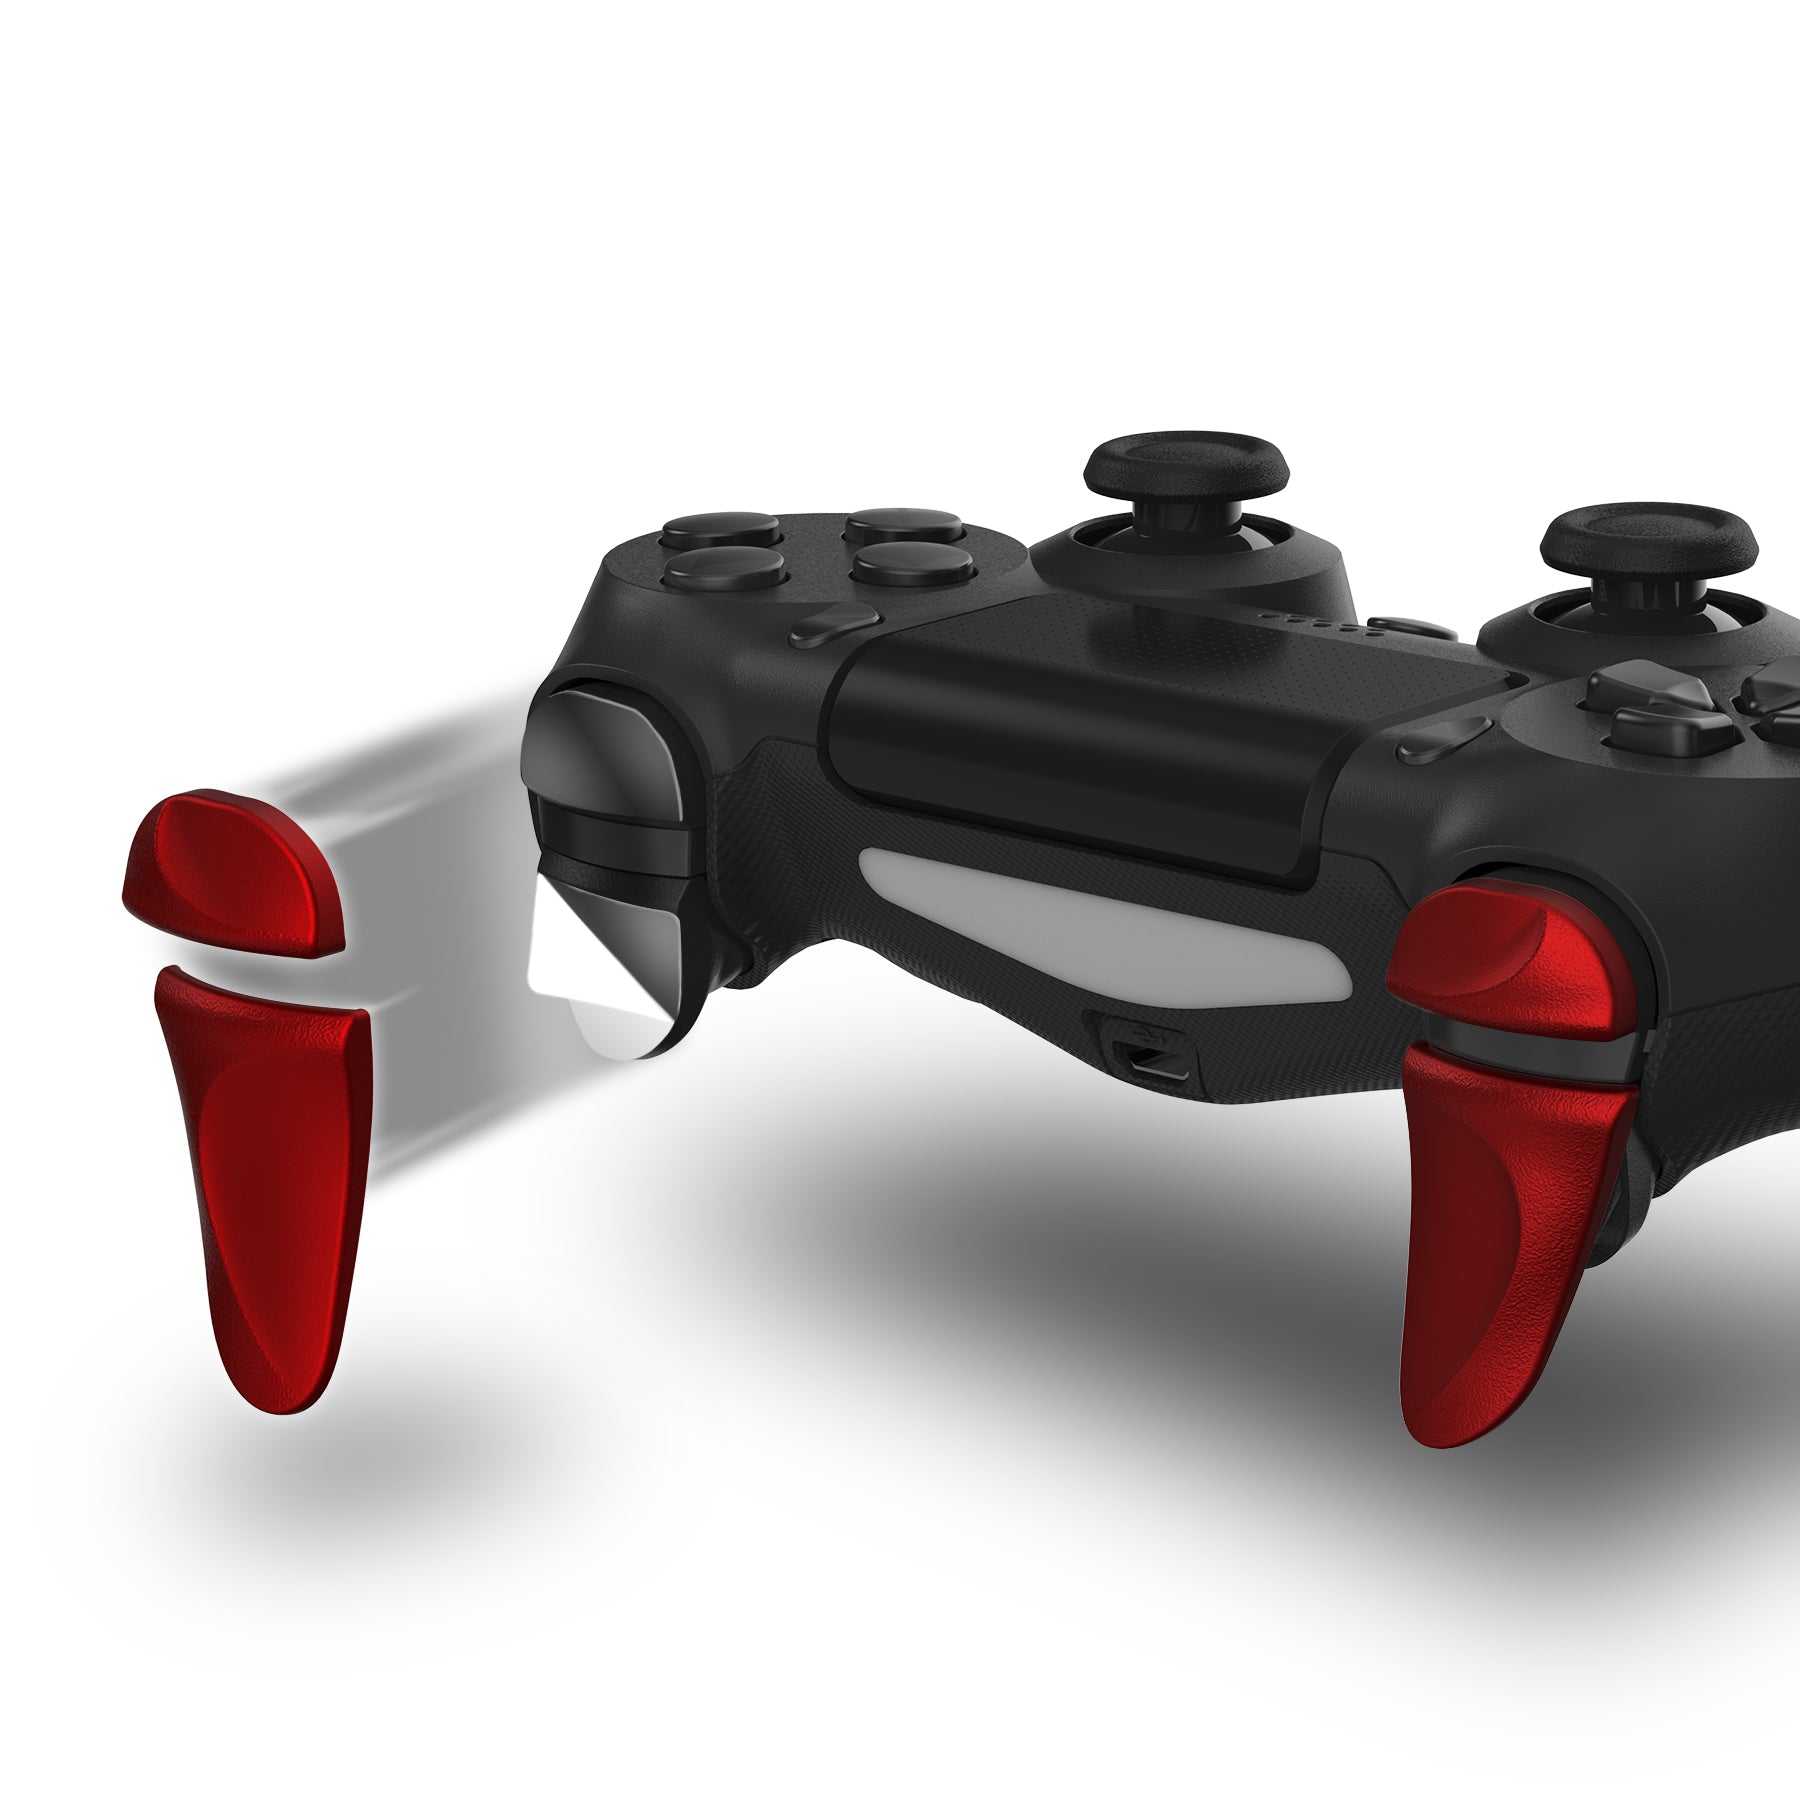 PlayVital 2 Pair Shoulder Buttons Extension Triggers for PS4 All Model Controller, Game Improvement Adjusters for PS4 Controller, Bumper Trigger Extenders for PS4 Slim Pro Controller - Scarlet Red - P4PJ004 PlayVital